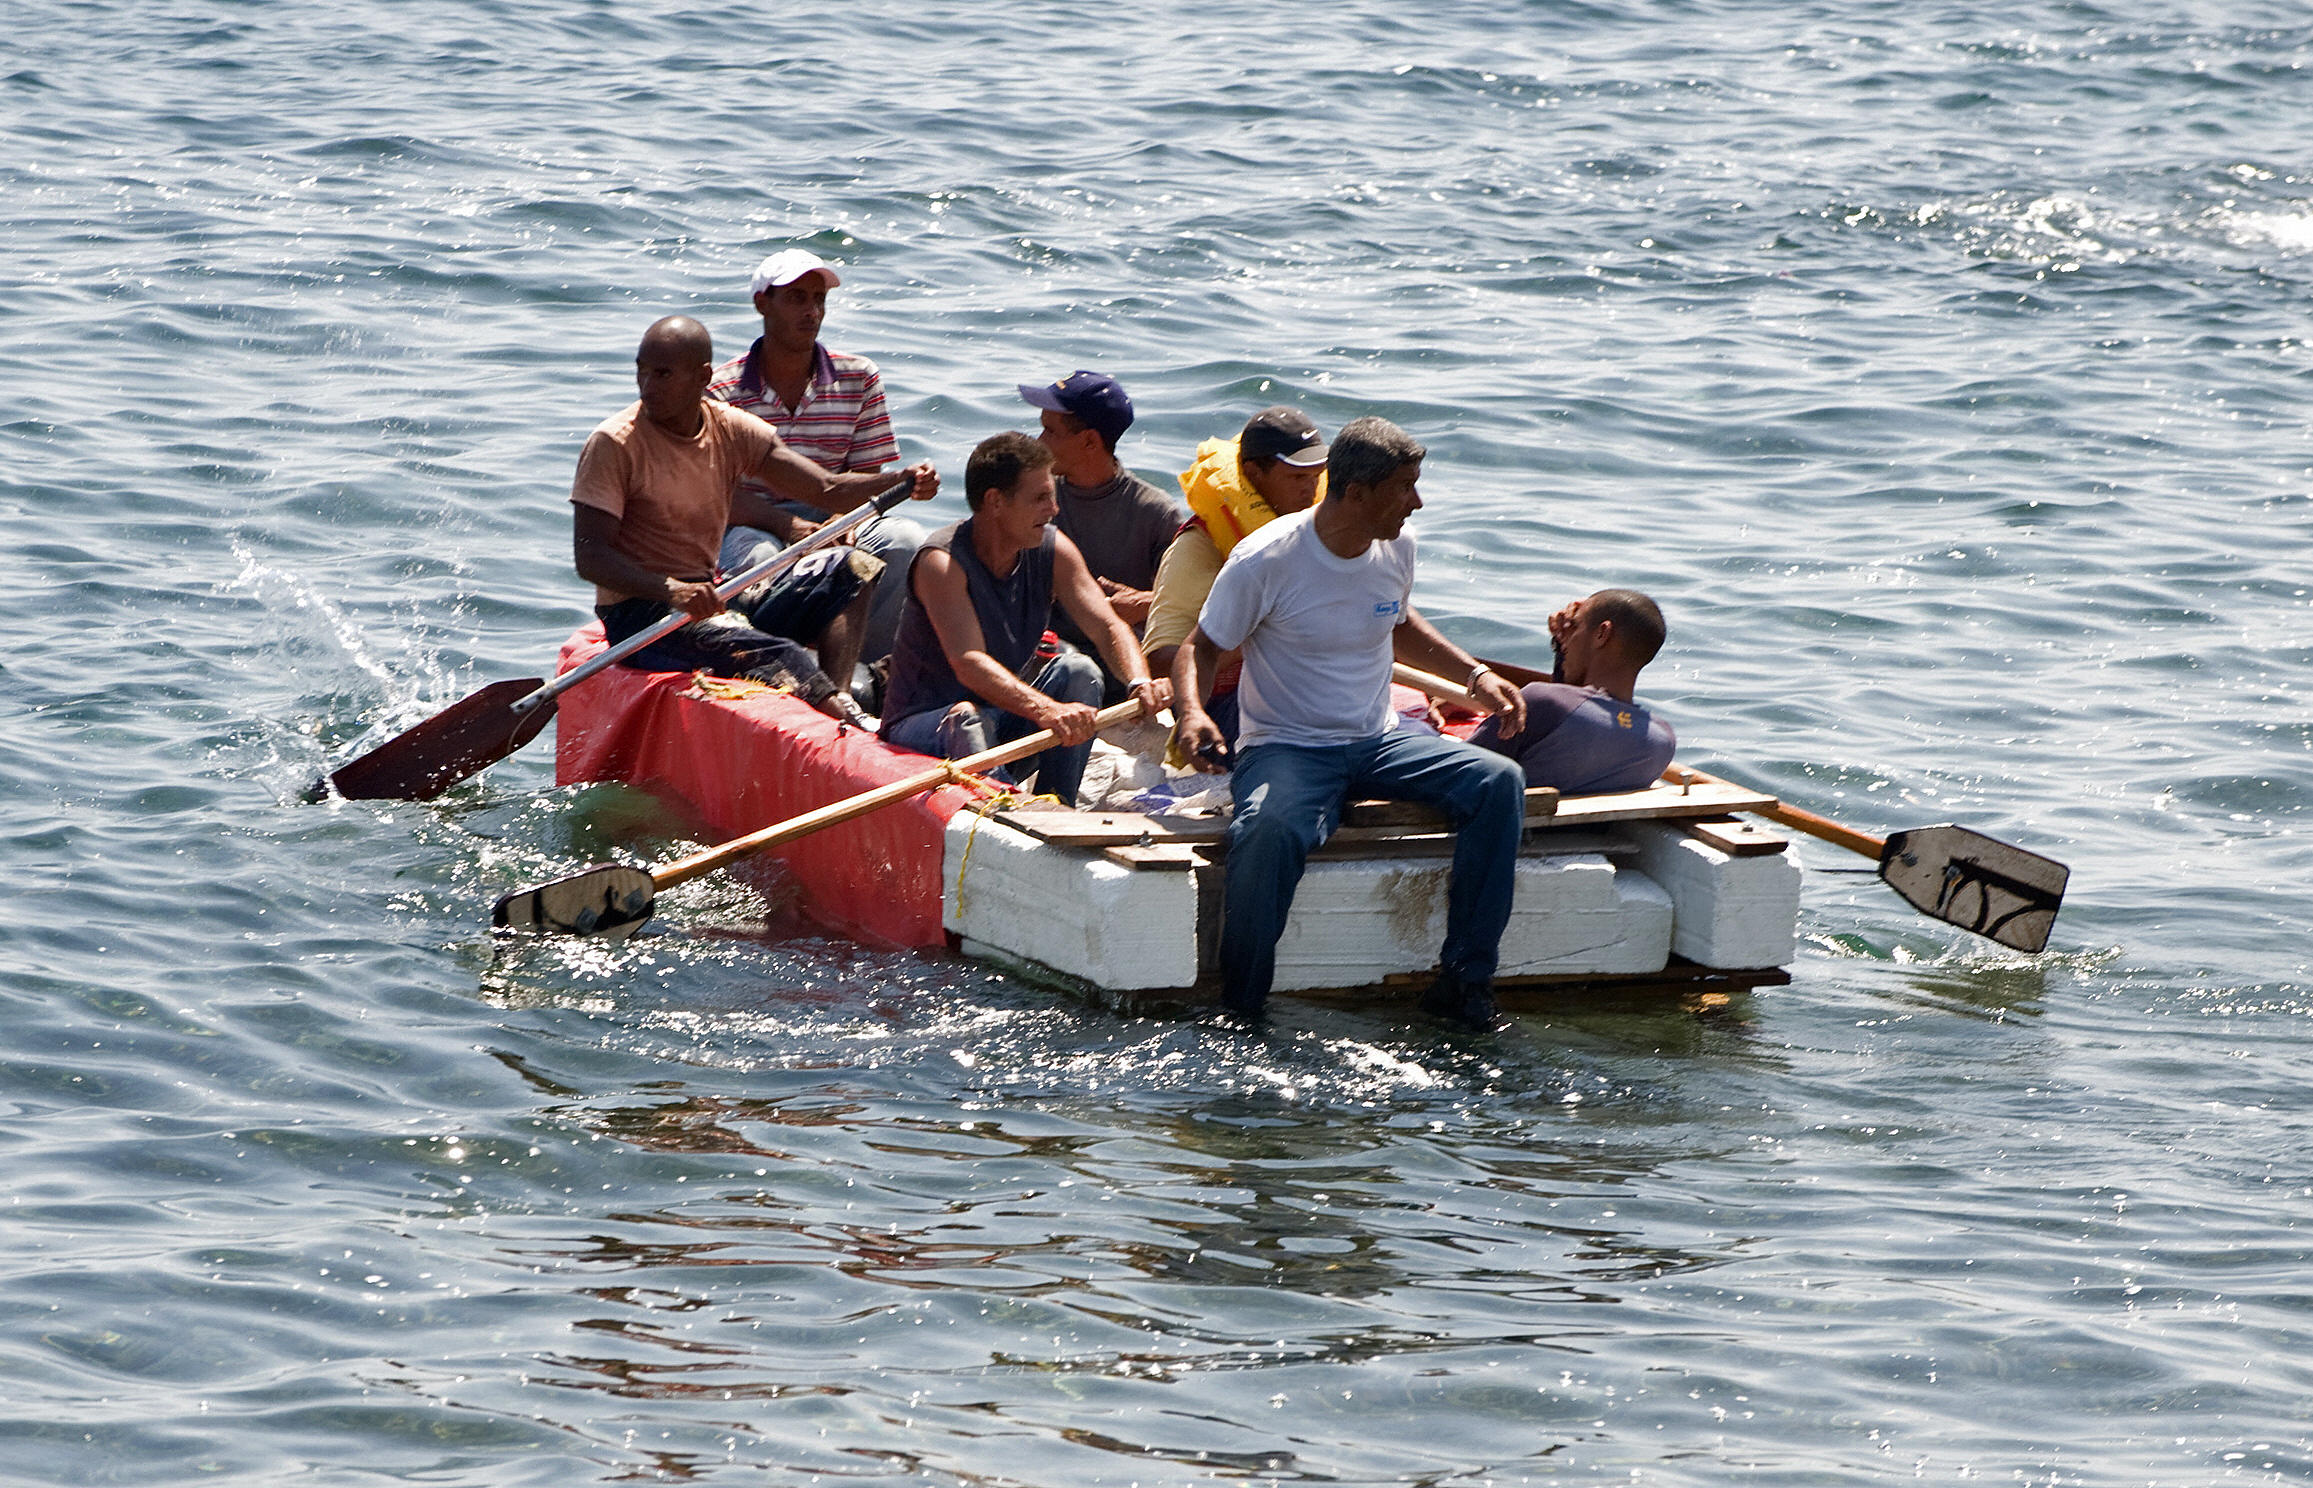 Seven would-be Cuban emigres remain in a homemade boat moments before being arrested by Cuban military agents after their attempt to escape from the island nation was thwarted by the sea currents, on June 4, 2009 in Havana. (Adalberto Roque/AFP/Getty Images)